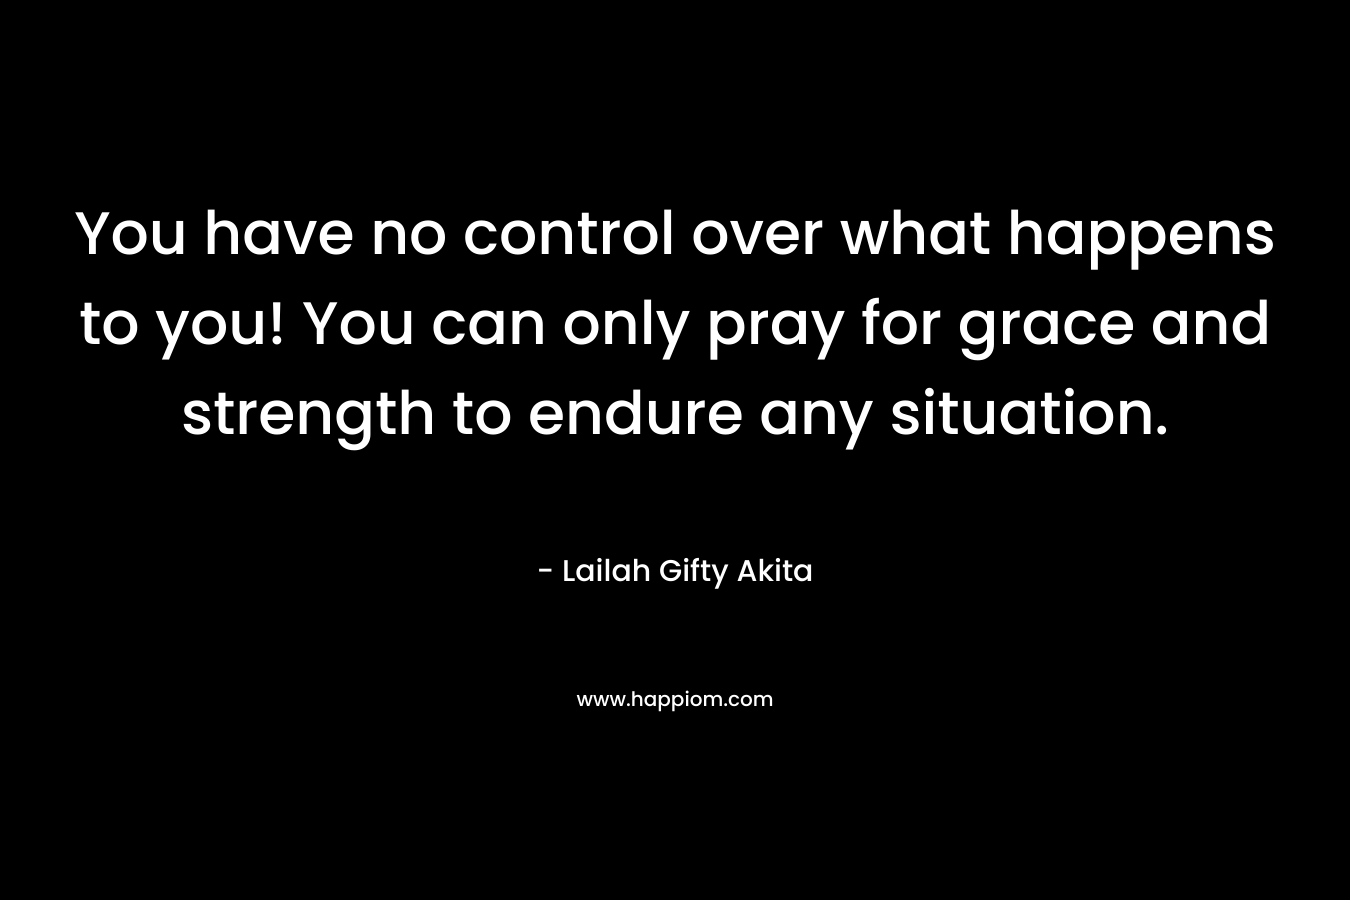 You have no control over what happens to you! You can only pray for grace and strength to endure any situation.